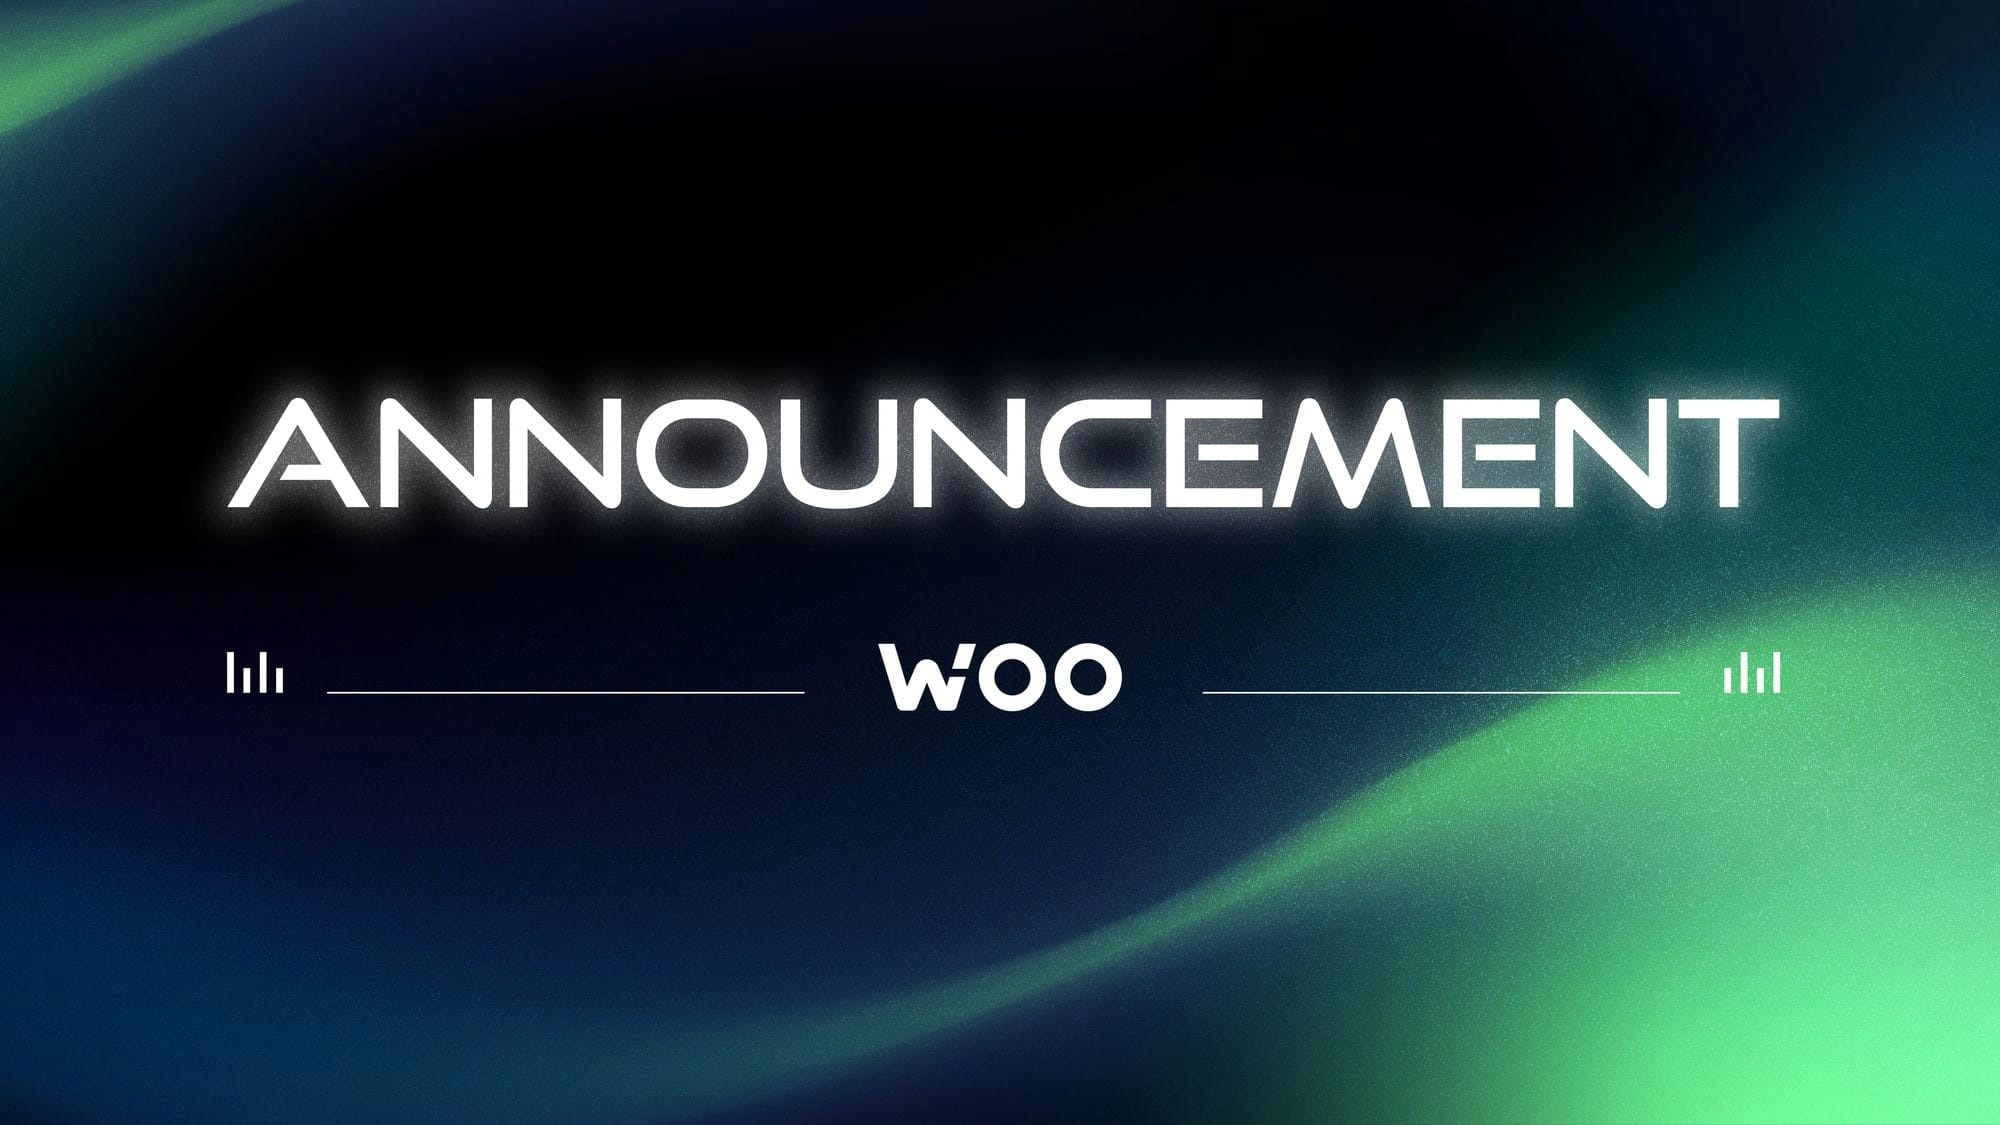 A new era for WOO